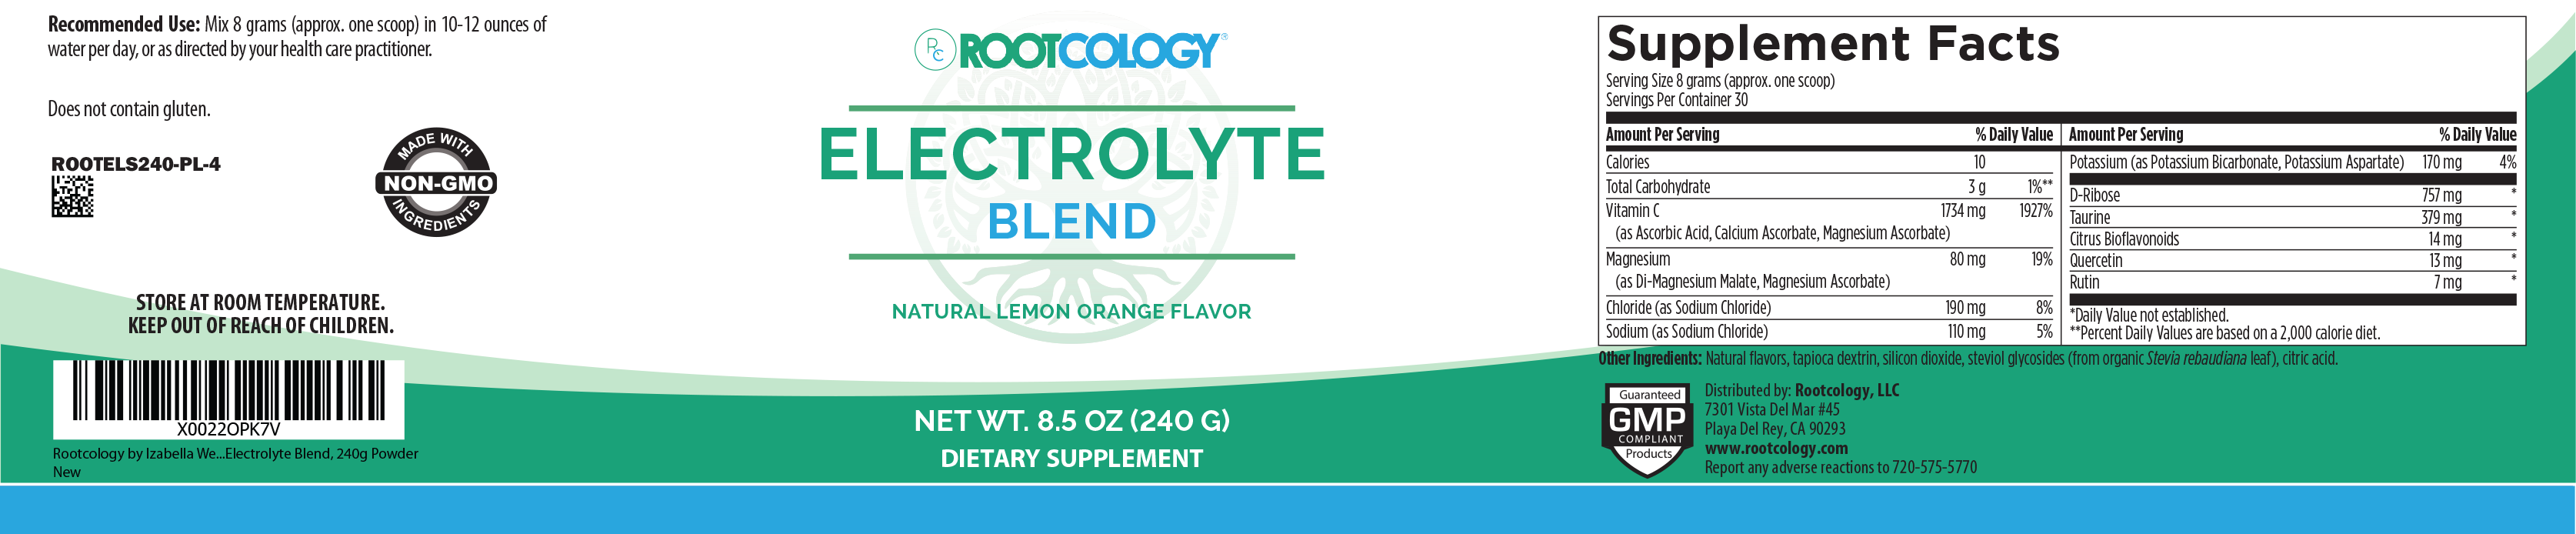 Rootcology Electrolyte Blend Supplement Label